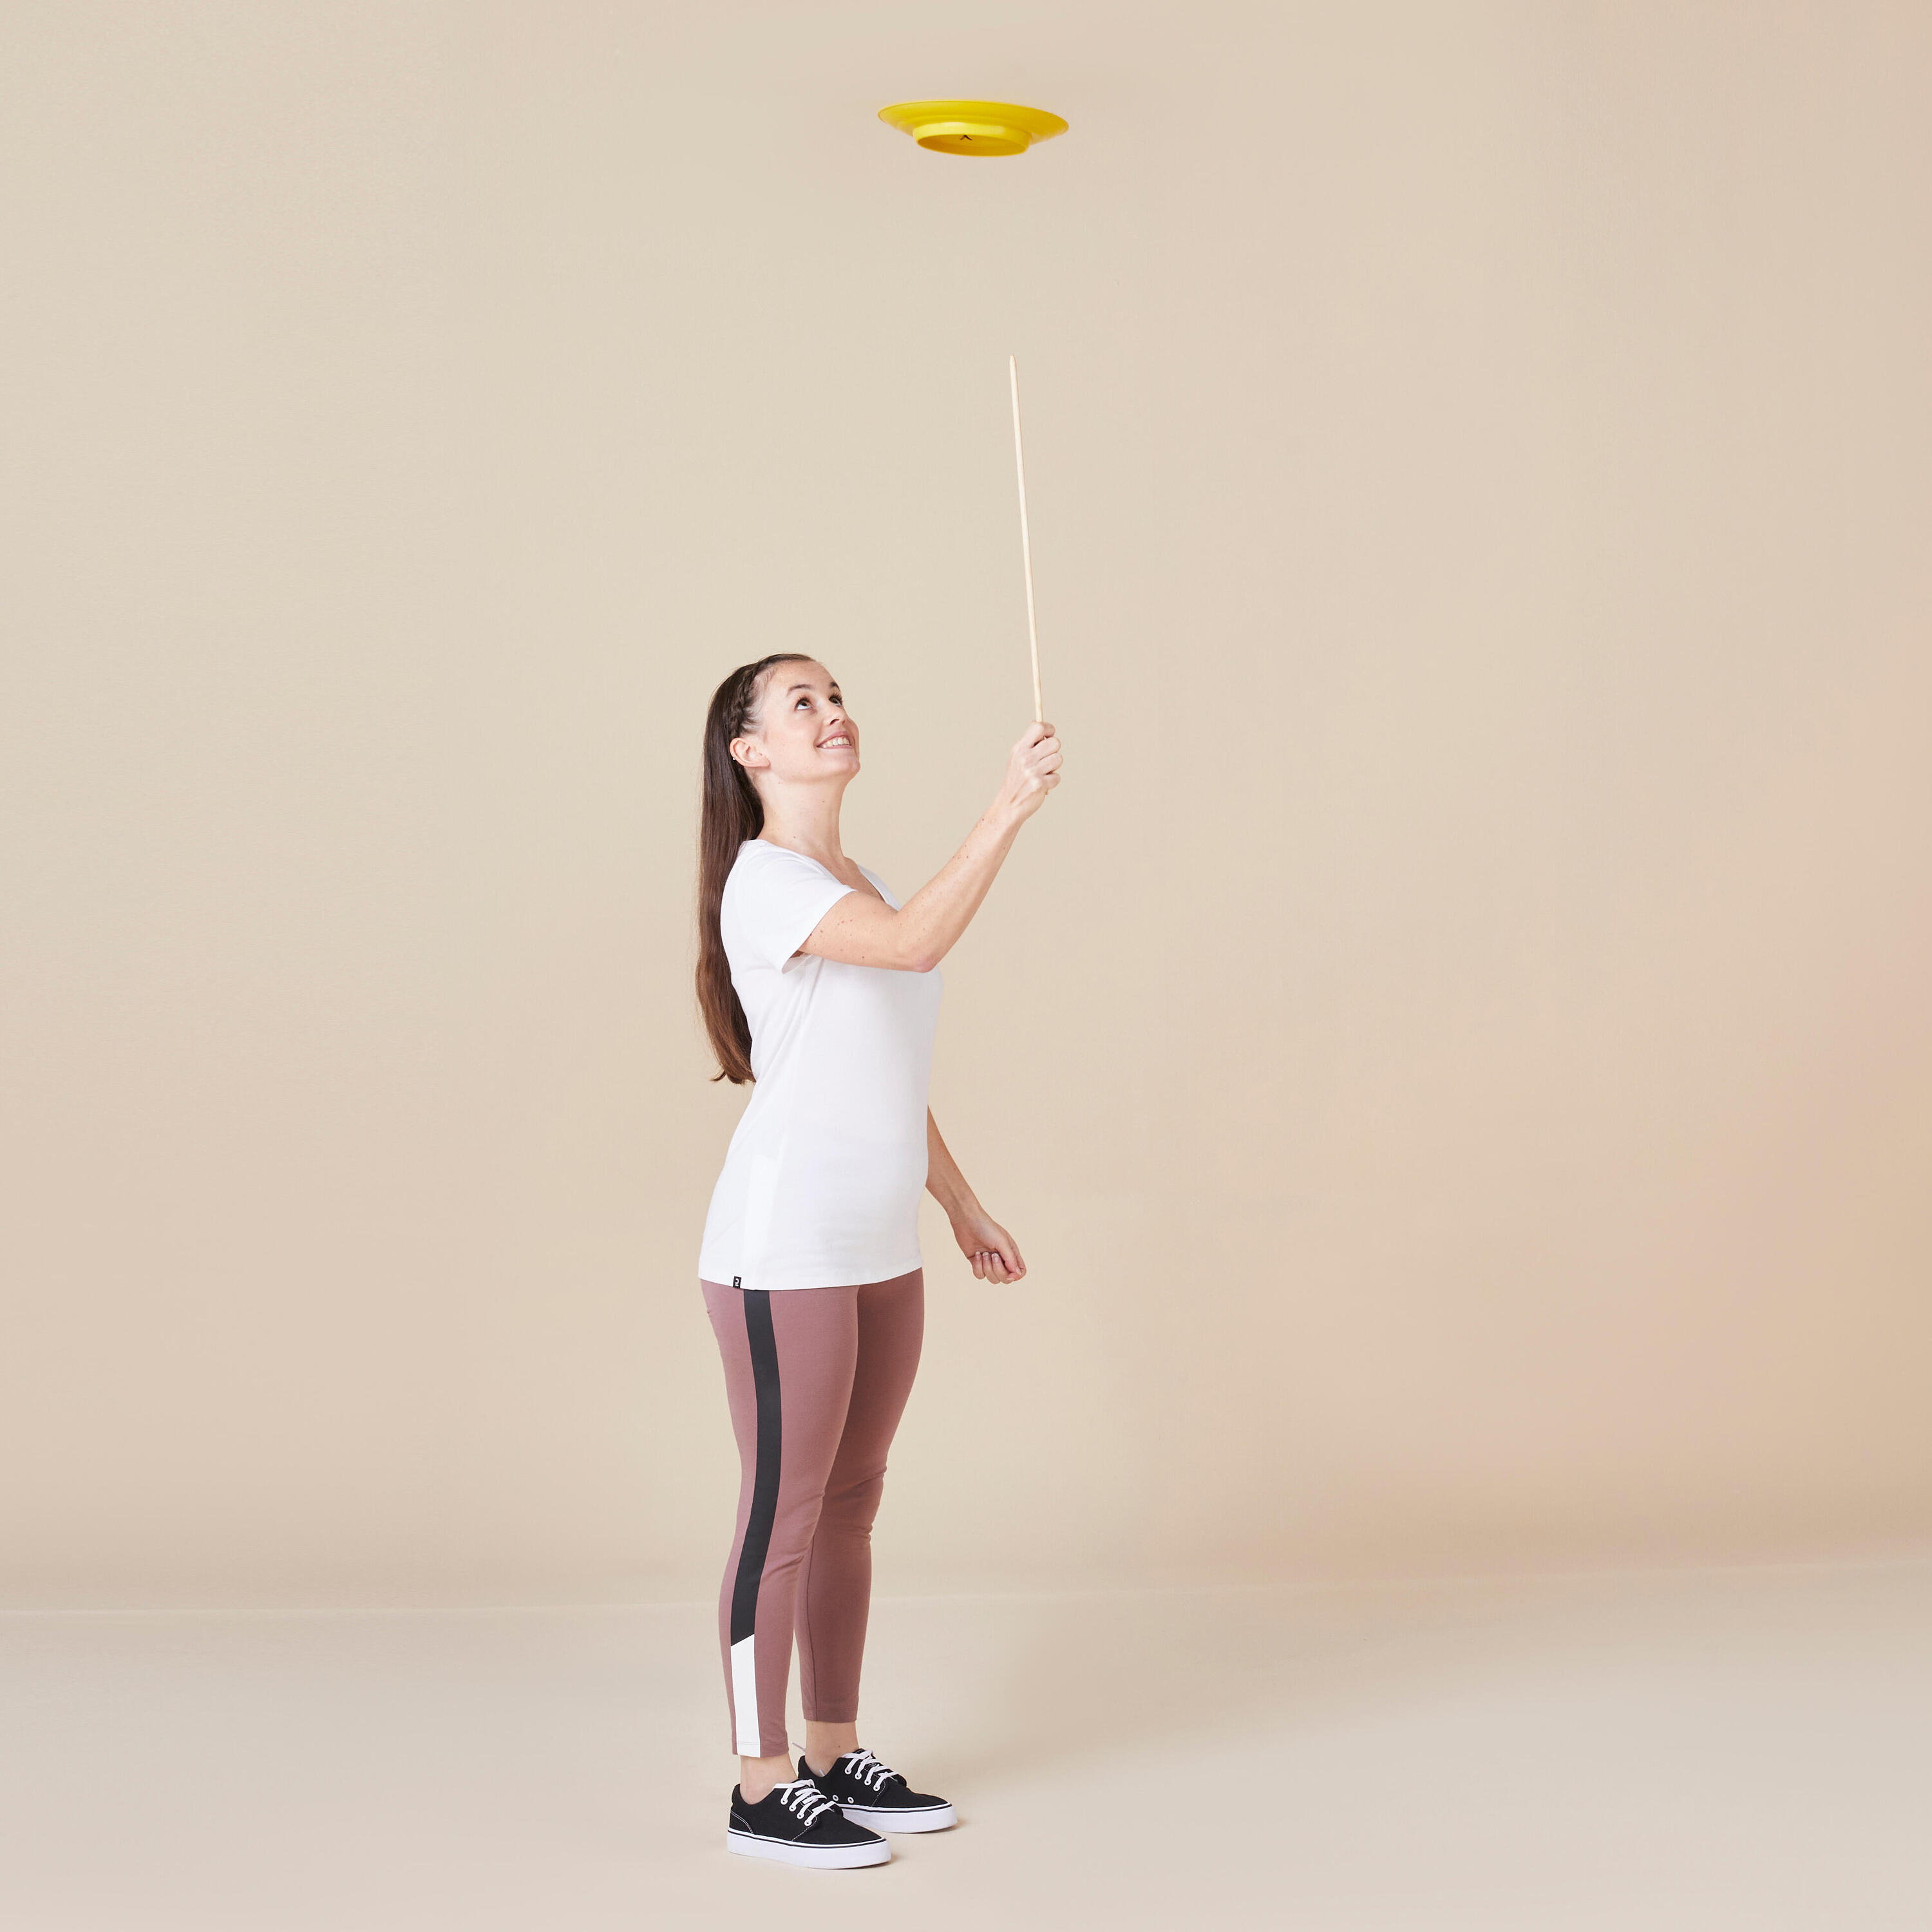 Spinning Plate + Wooden Stick - Yellow 4/7